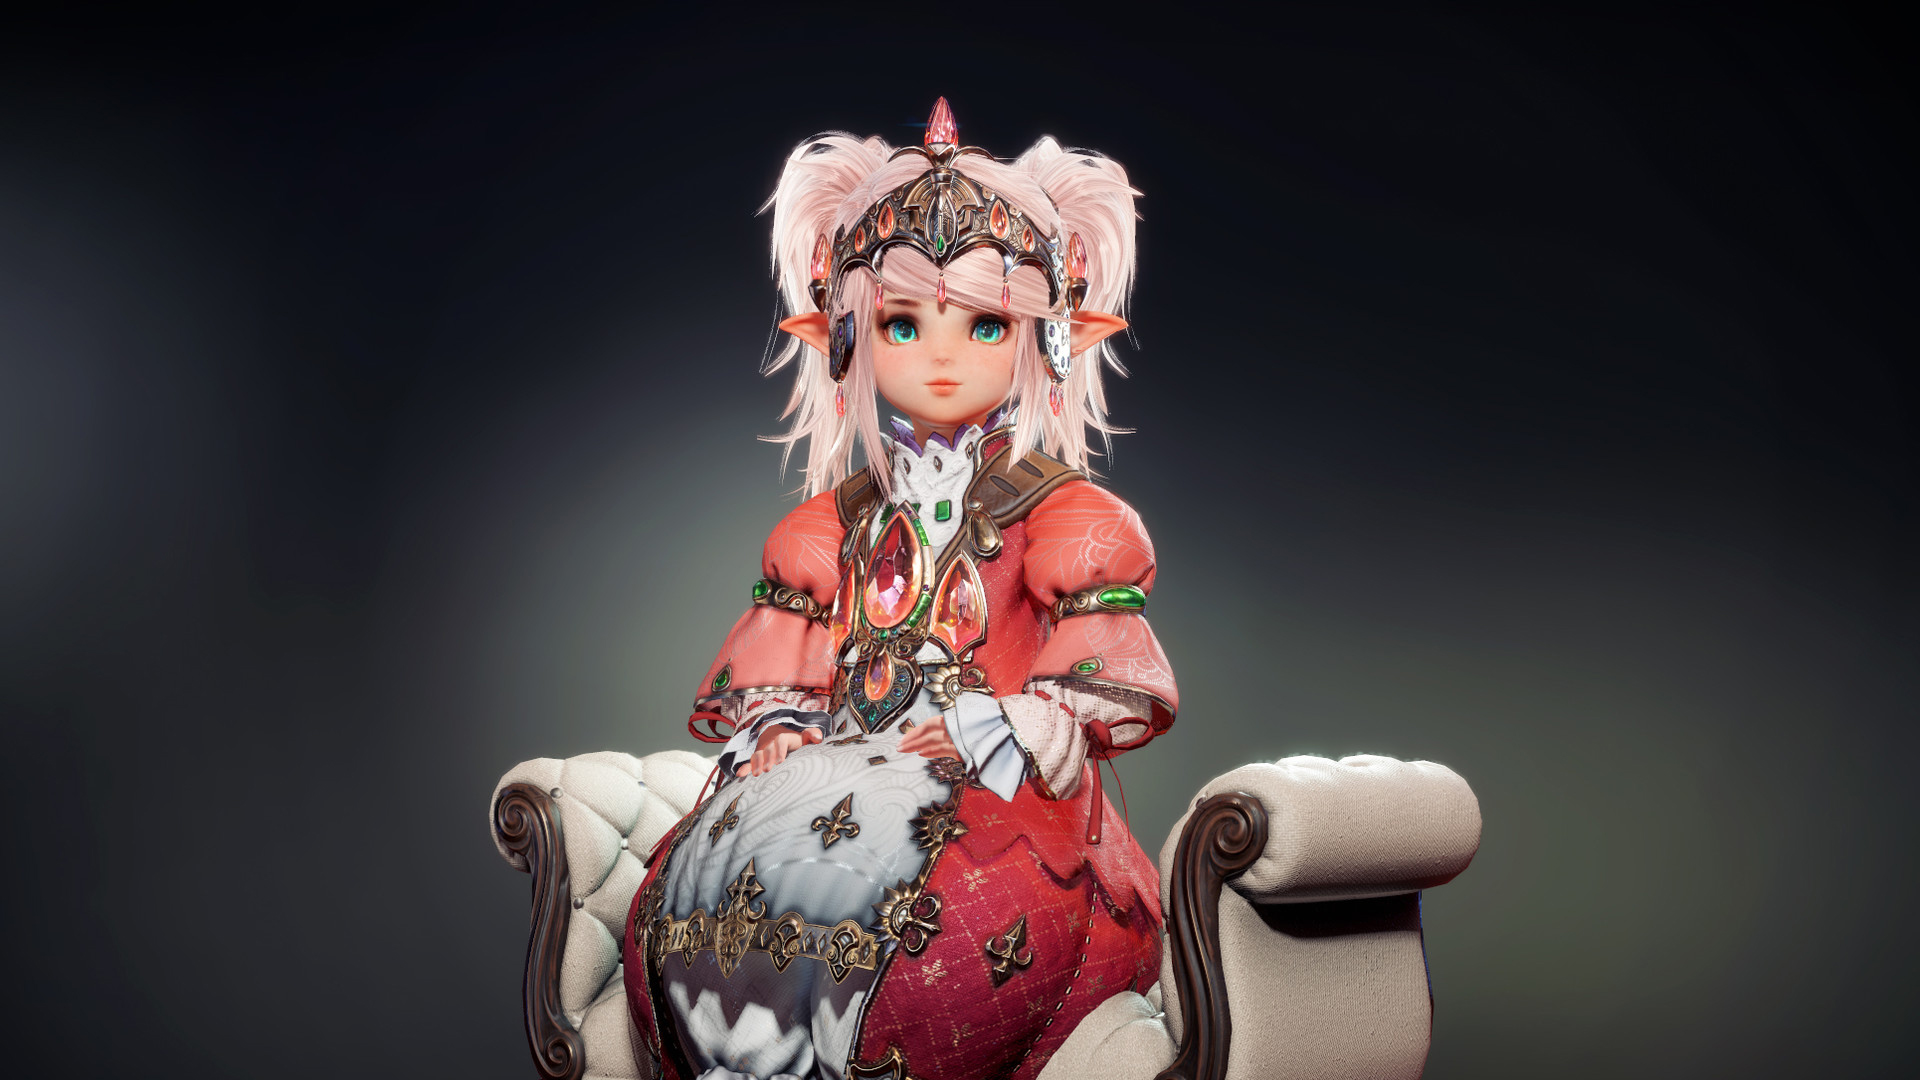 Green Eyes Girl Sitting In A Chair With Gray And Black Wallpaper Final Fantasy XIV 2K Final Fantasy XIV Games